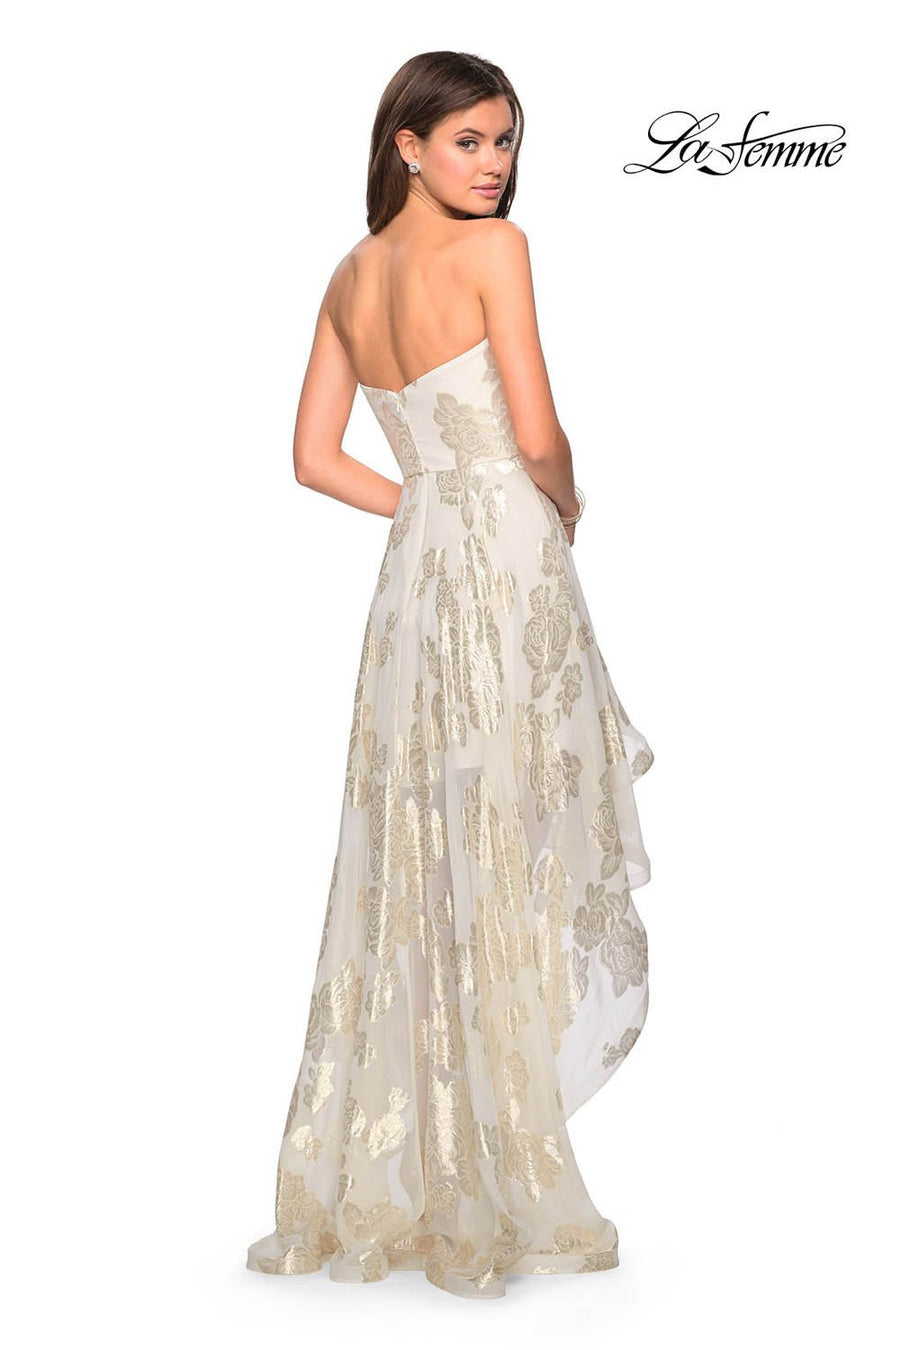 La Femme 27753 prom dress images.  La Femme 27753 is available in these colors: Ivory Gold.